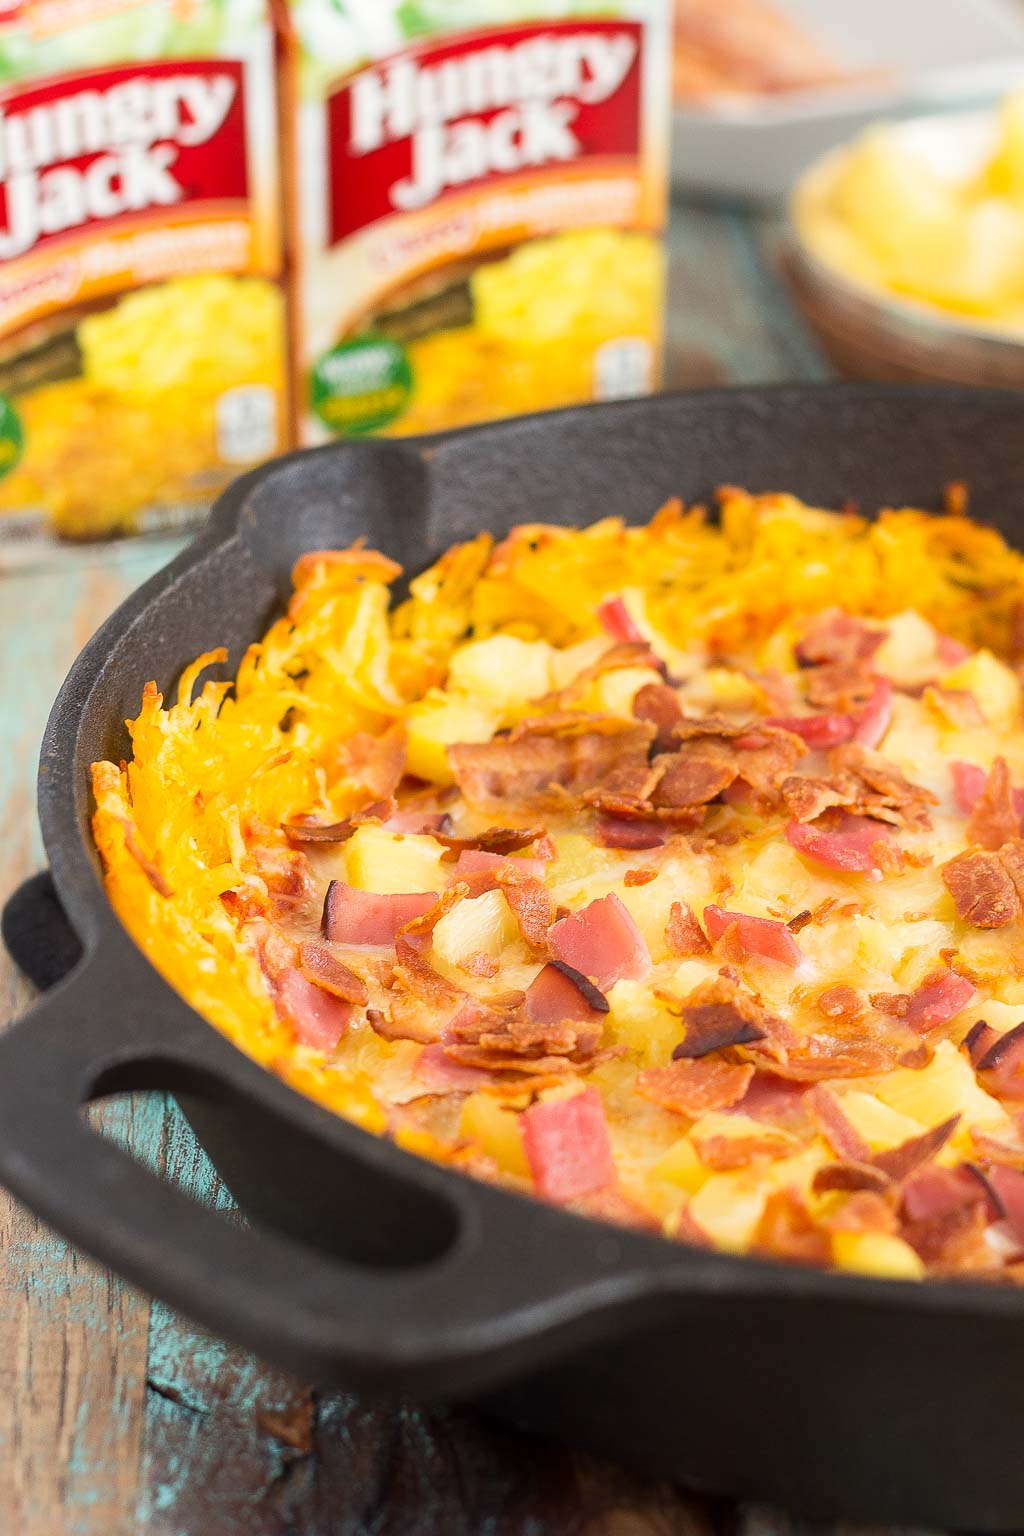 Put a spin on pizza night with hashbrowns for dinner! This Hawaiian Pizza with Hashbrown Crust features a cheesy, crispy hashbrown crust that's loaded with two types of meat, pineapple chunks, and melted, mozzarella cheese. Easy to make and full of flavor, this pizza will be your new favorite dish!